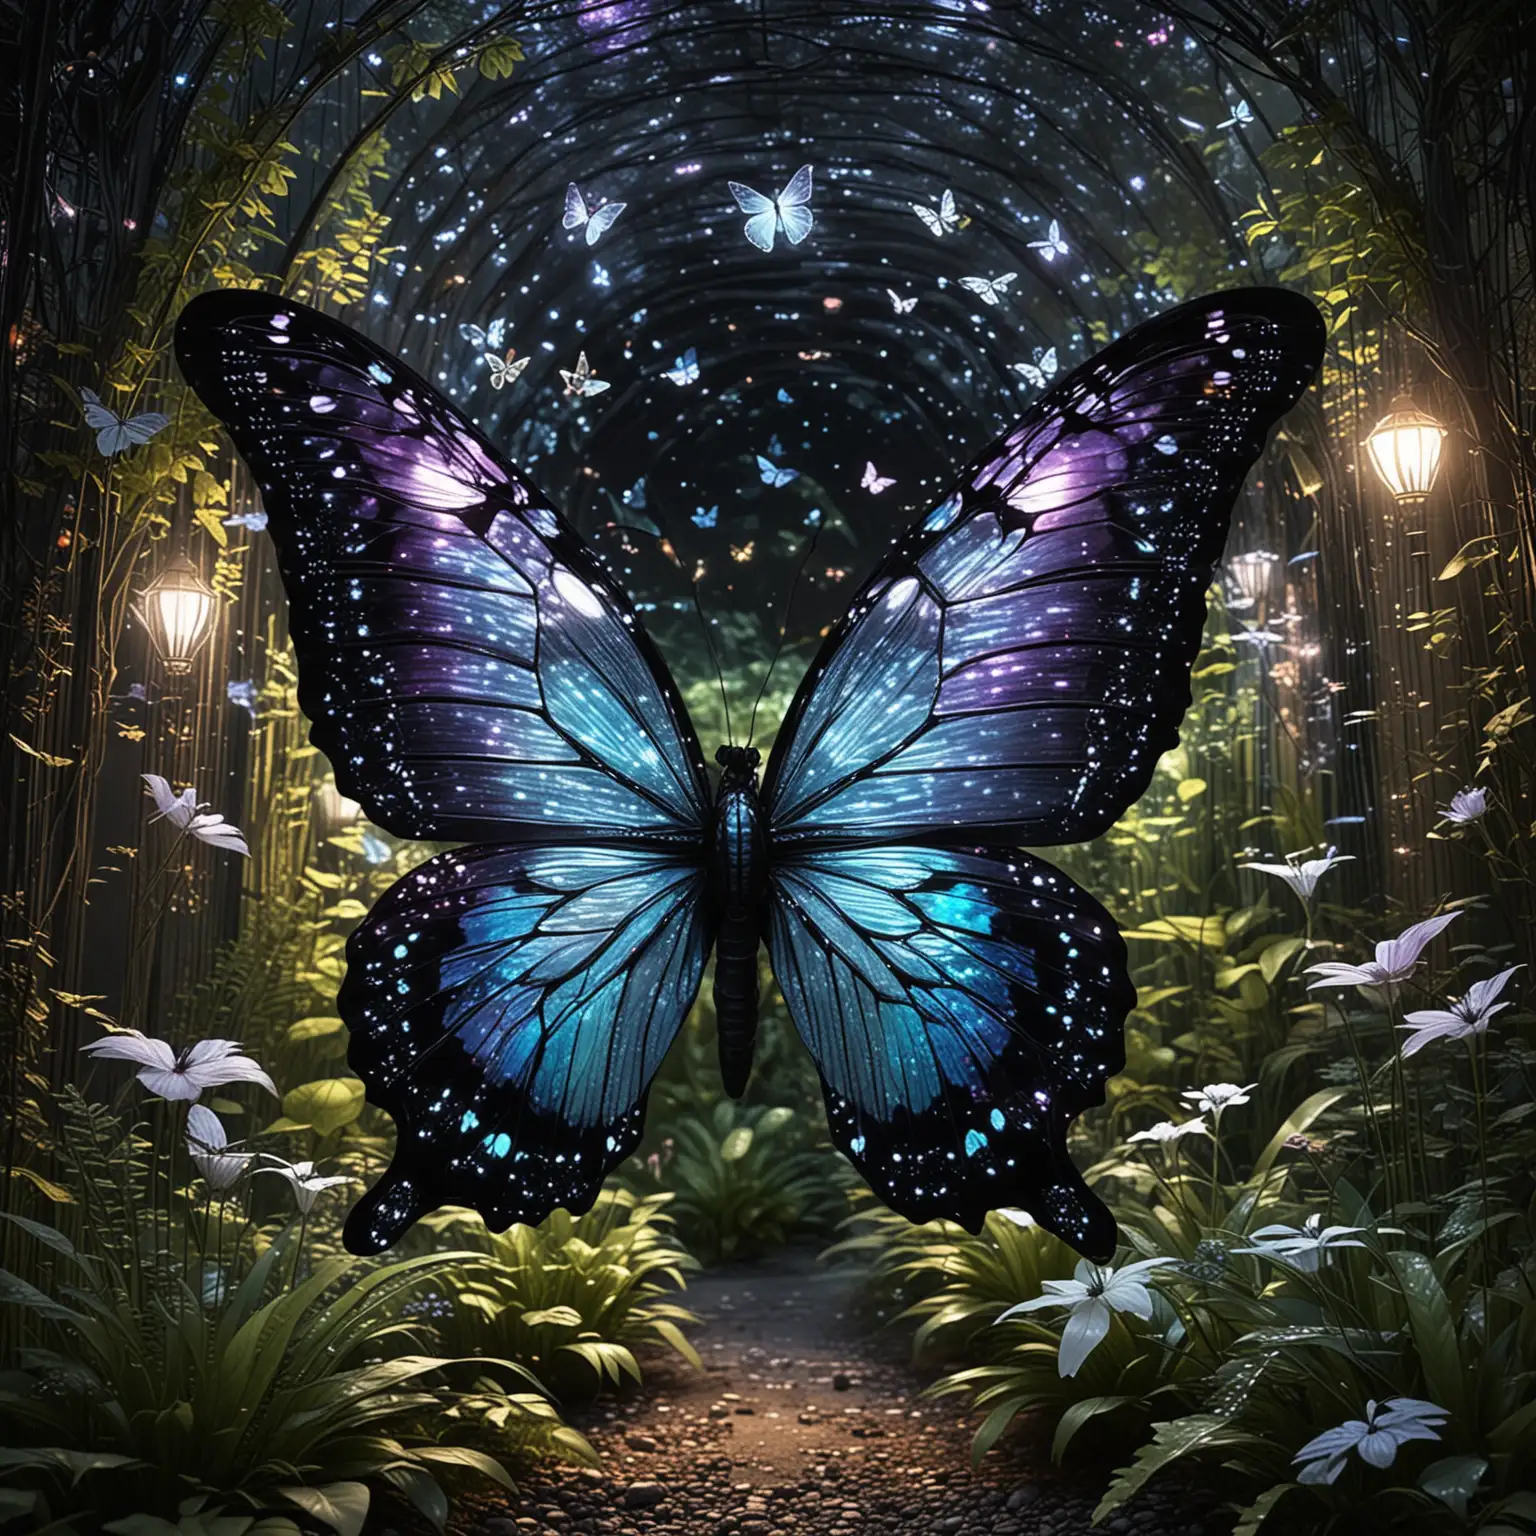 Futuristic Wildlife Oasis Butterfly Garden with Glowing Enhancements